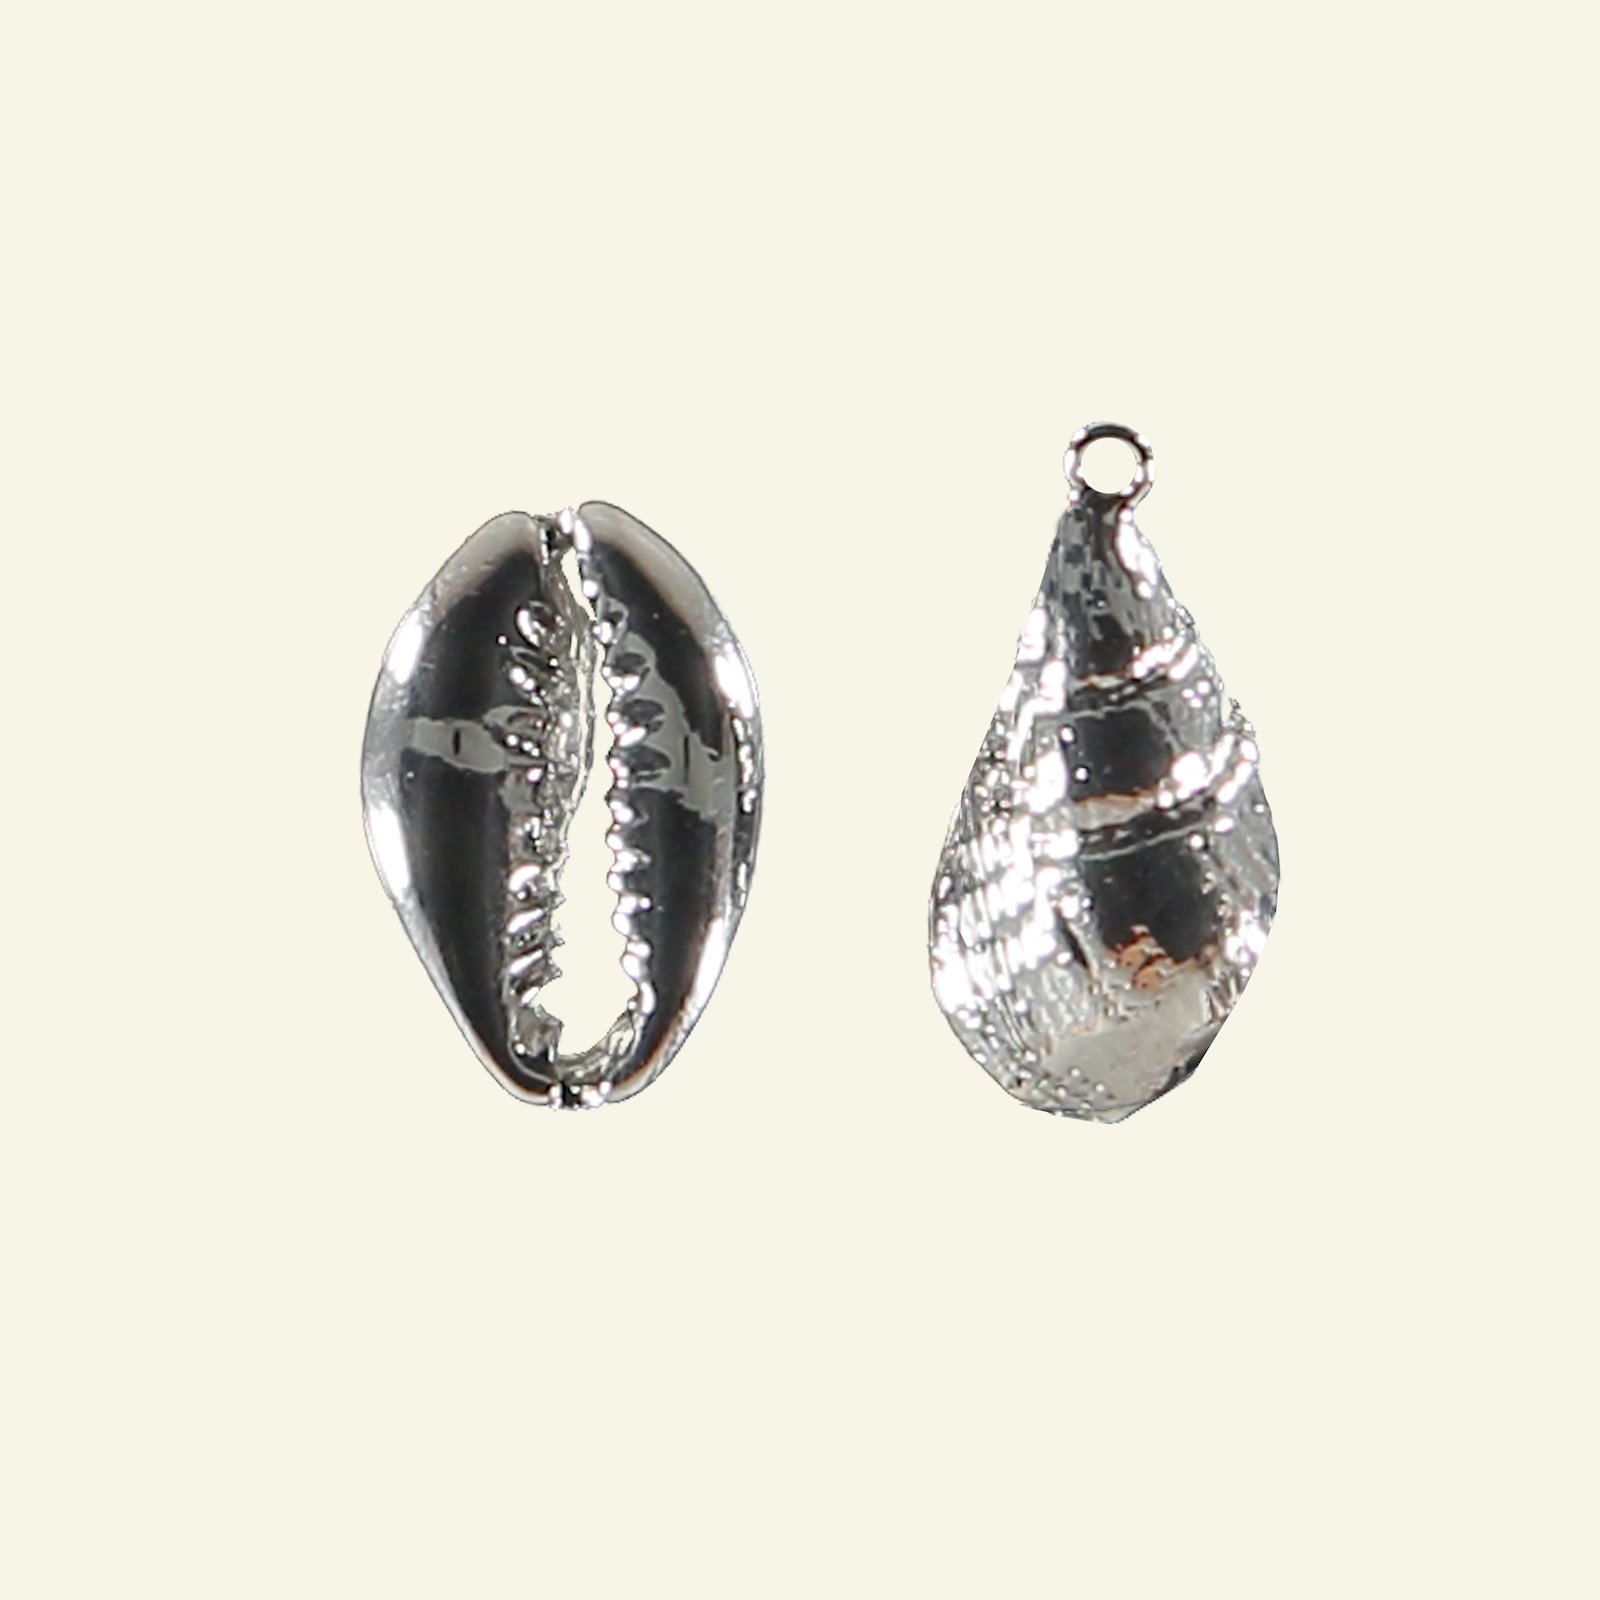 Pendant shells 17-20mm silver colored 96246_pack